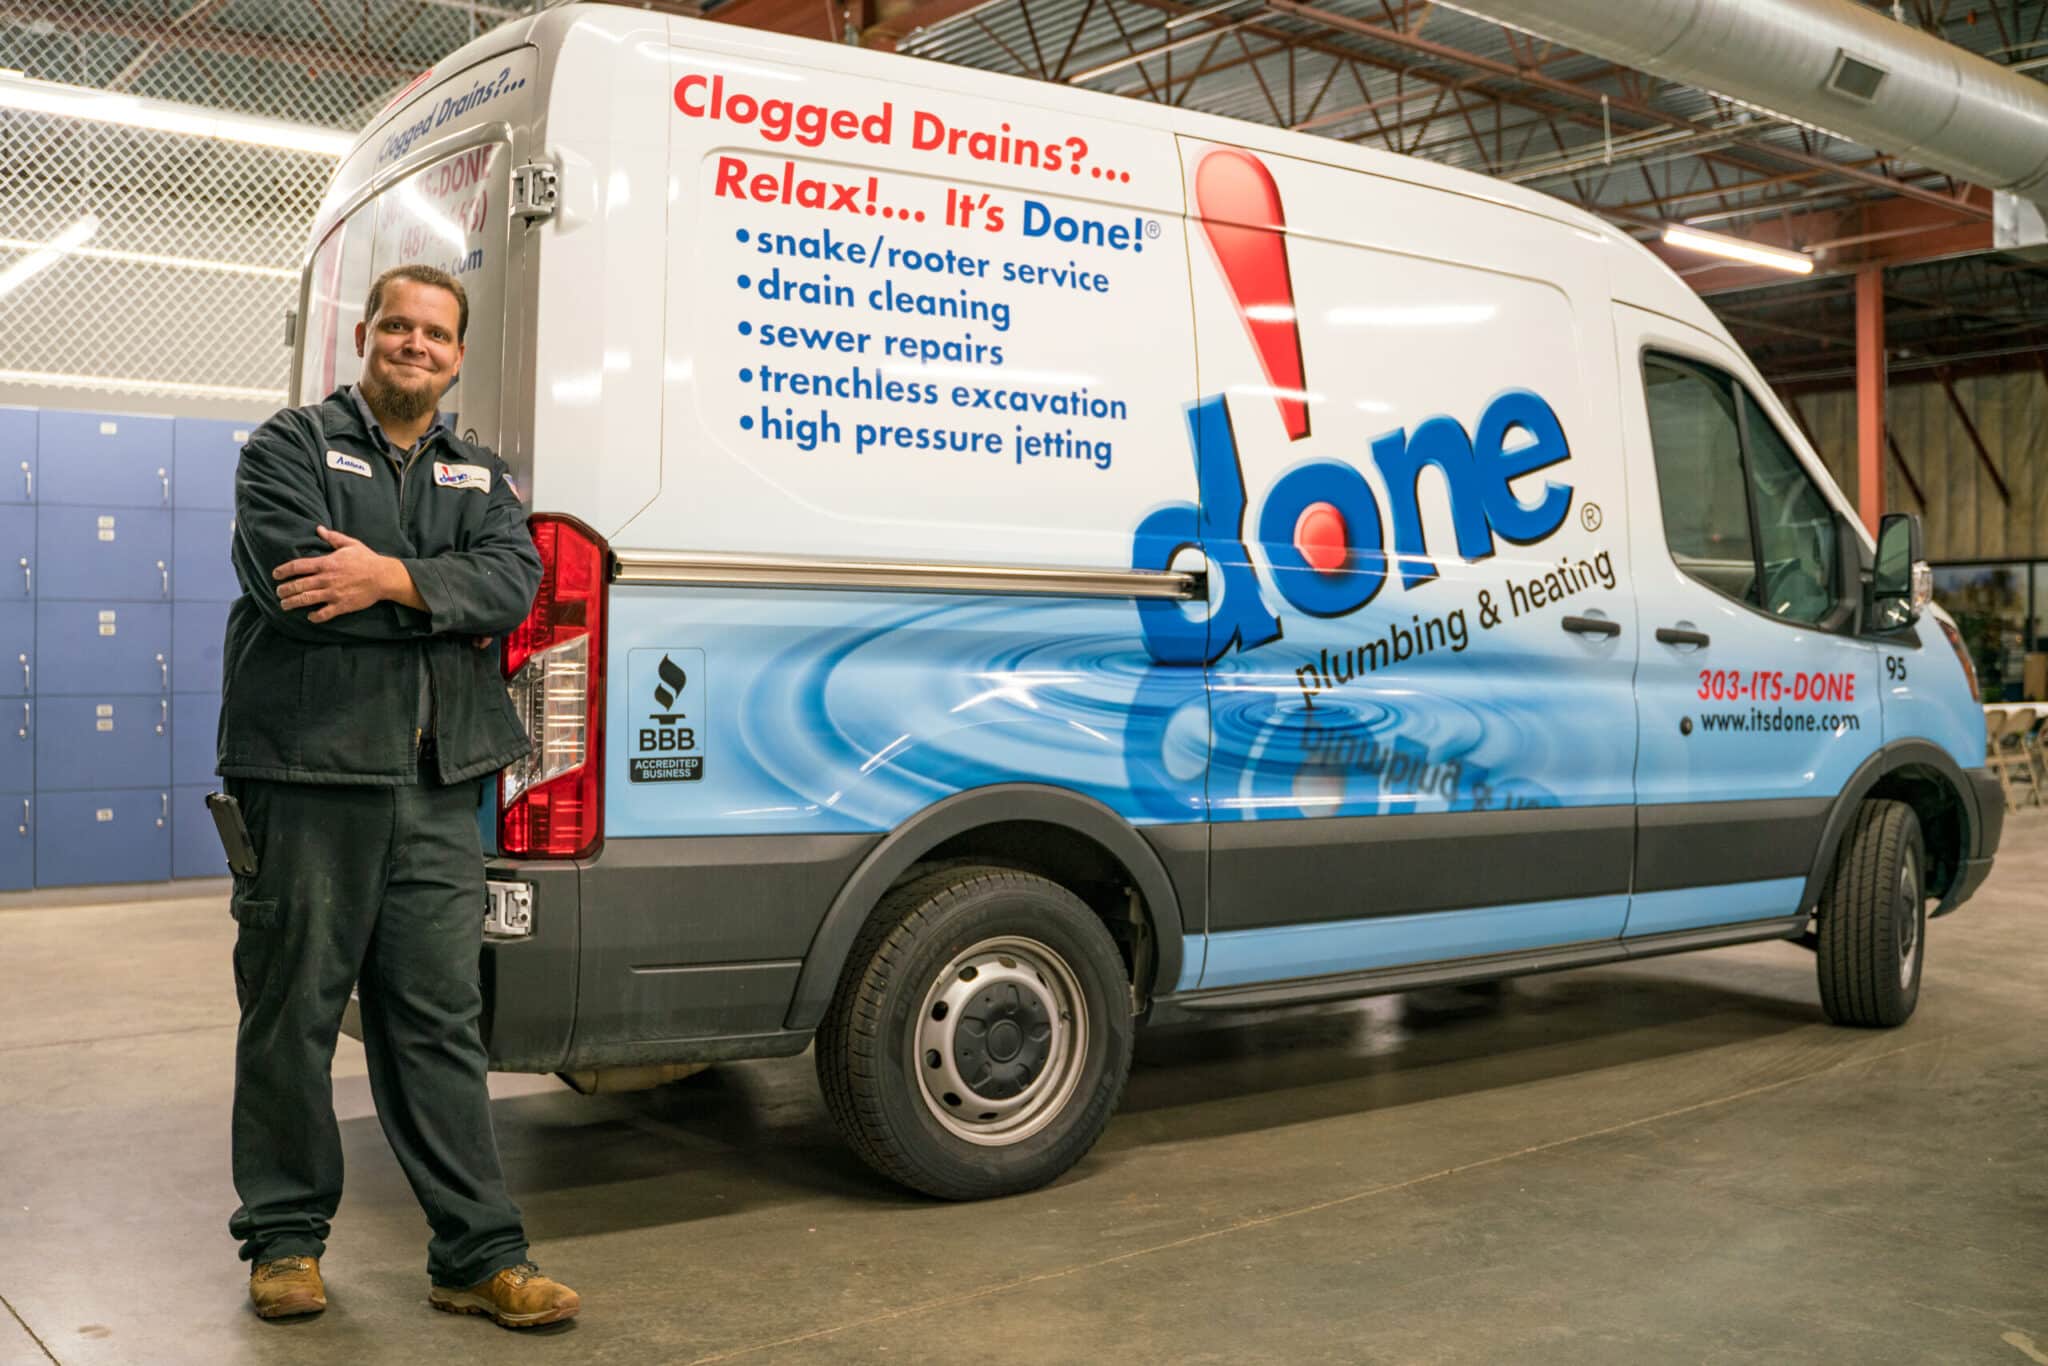 A Done technician next to his work van